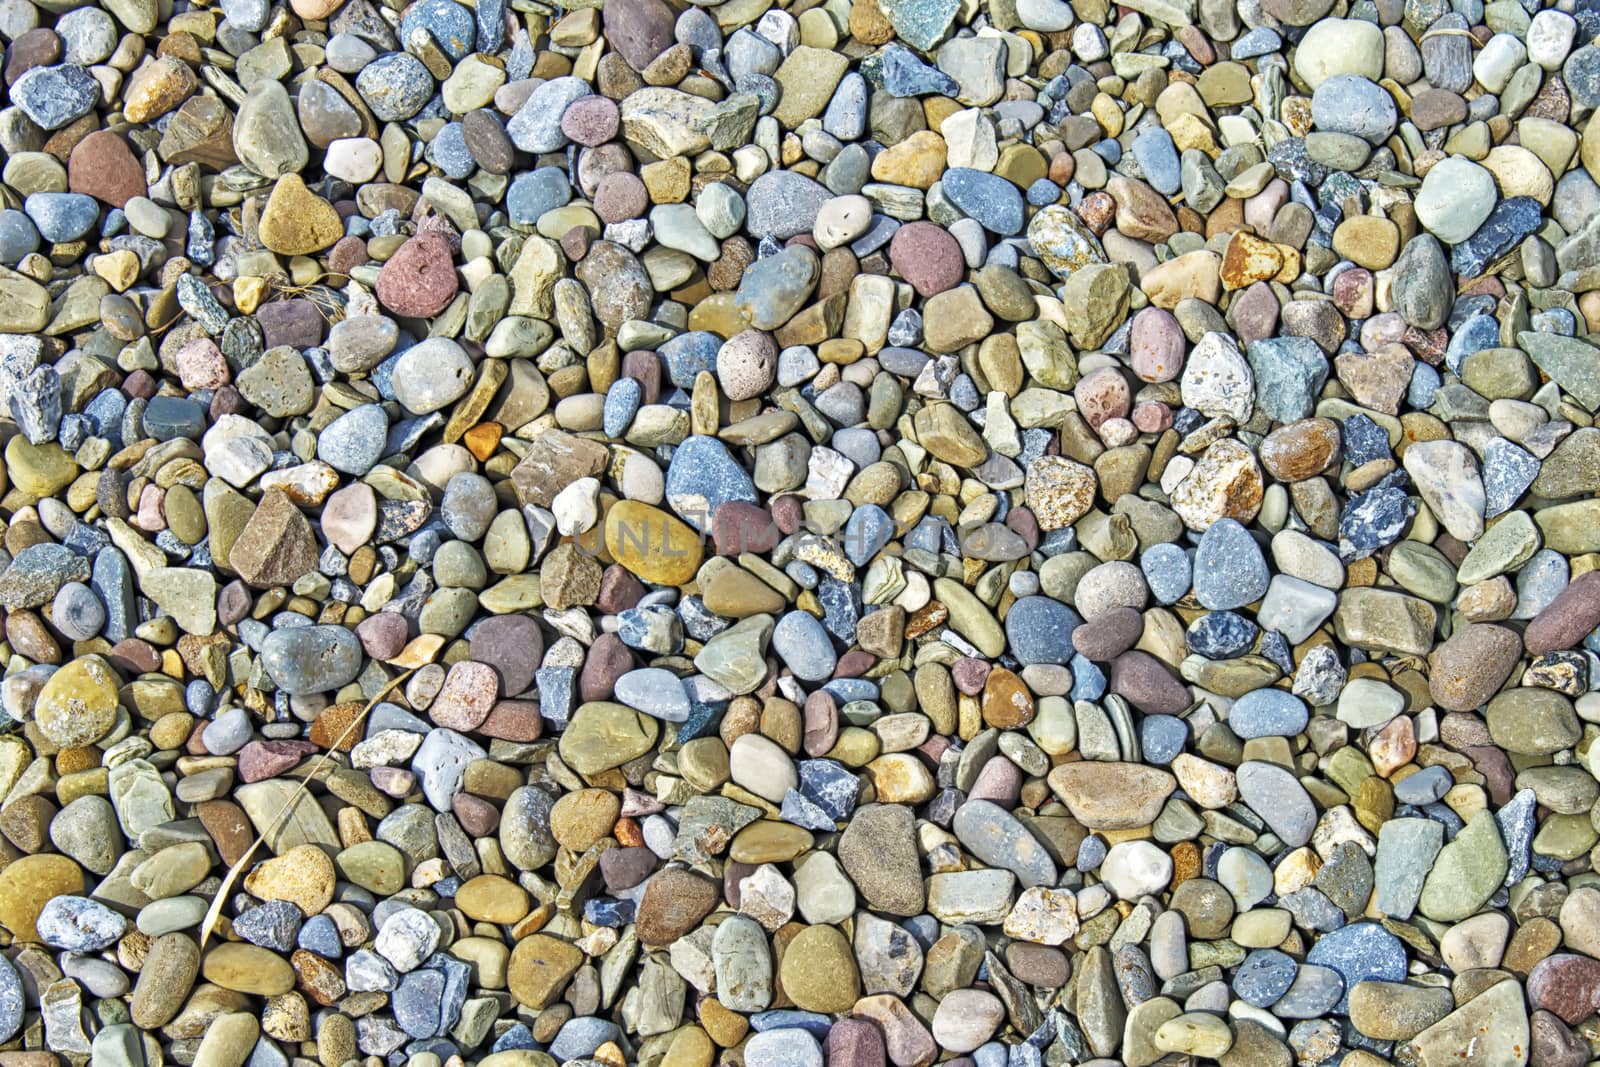 Closeup of water worn beach stones with differing shapes, sizes, and colors. Interesting texture.